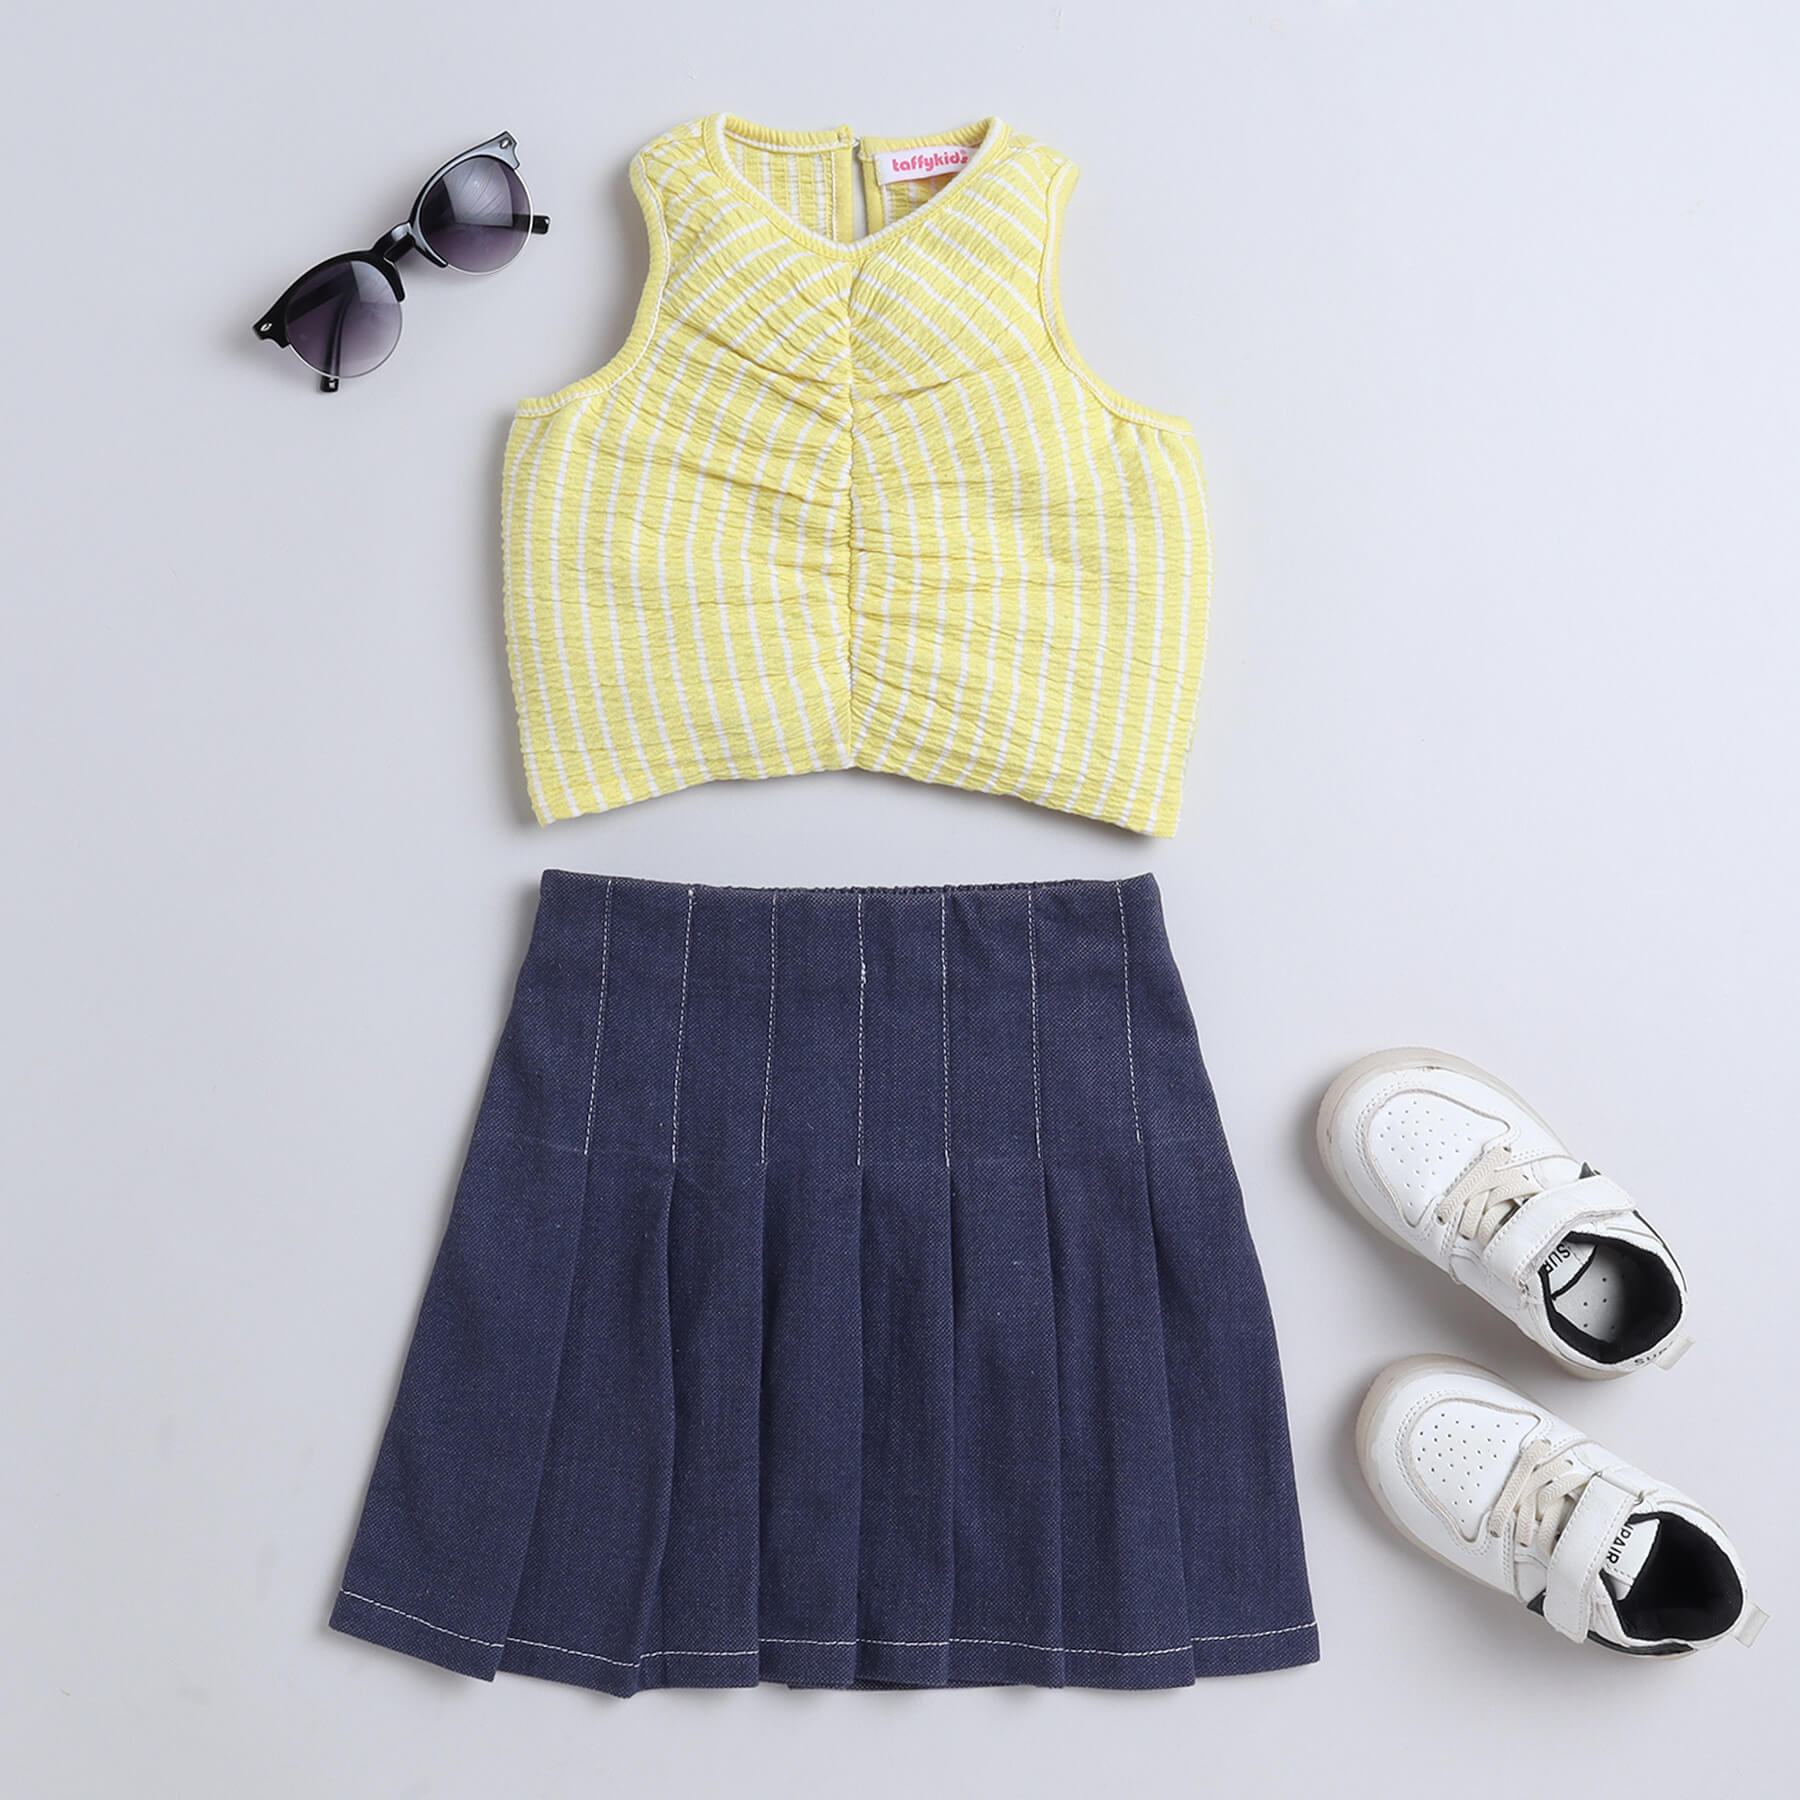 Taffykids 100% cotton textured stripes yarn dyed front ruched sleeveless crop top and stitch detail pleated skirt set-Yellow/Blue